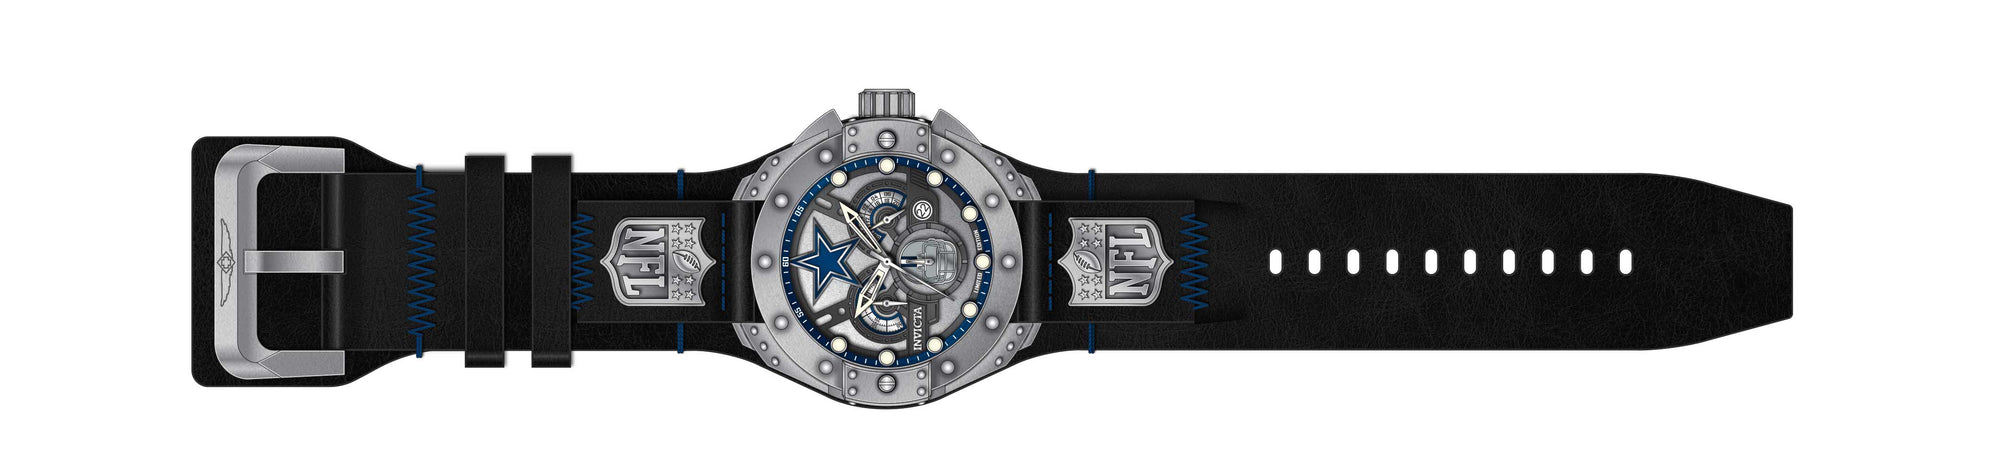 Band For Invicta NFL 45114